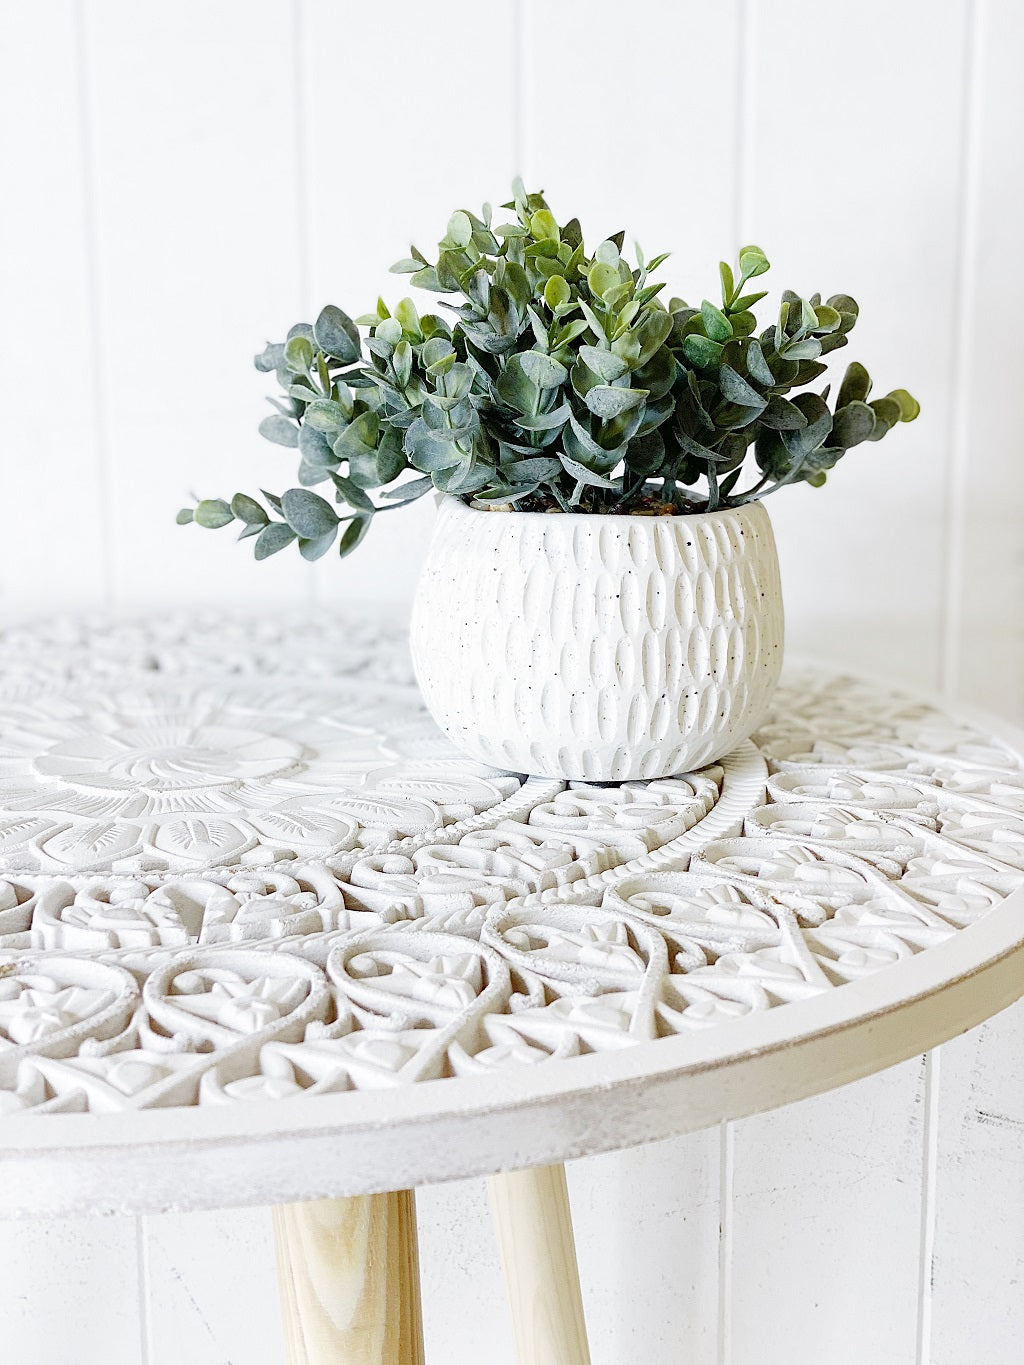 Liven up your indoor spaces with our Eucalyptus Bush in Speckled Ceramic Pot. With its speckle vase, it will add texture and colour to any room. Great for adding a splash of colour to a bathroom or windowsill. Shop Online. AfterPay Available. Australia Wide Shipping | Bliss Gifts &amp; Homewares - Unit 8, 259 Princes Hwy Ulladulla - 0427795959, 44541523